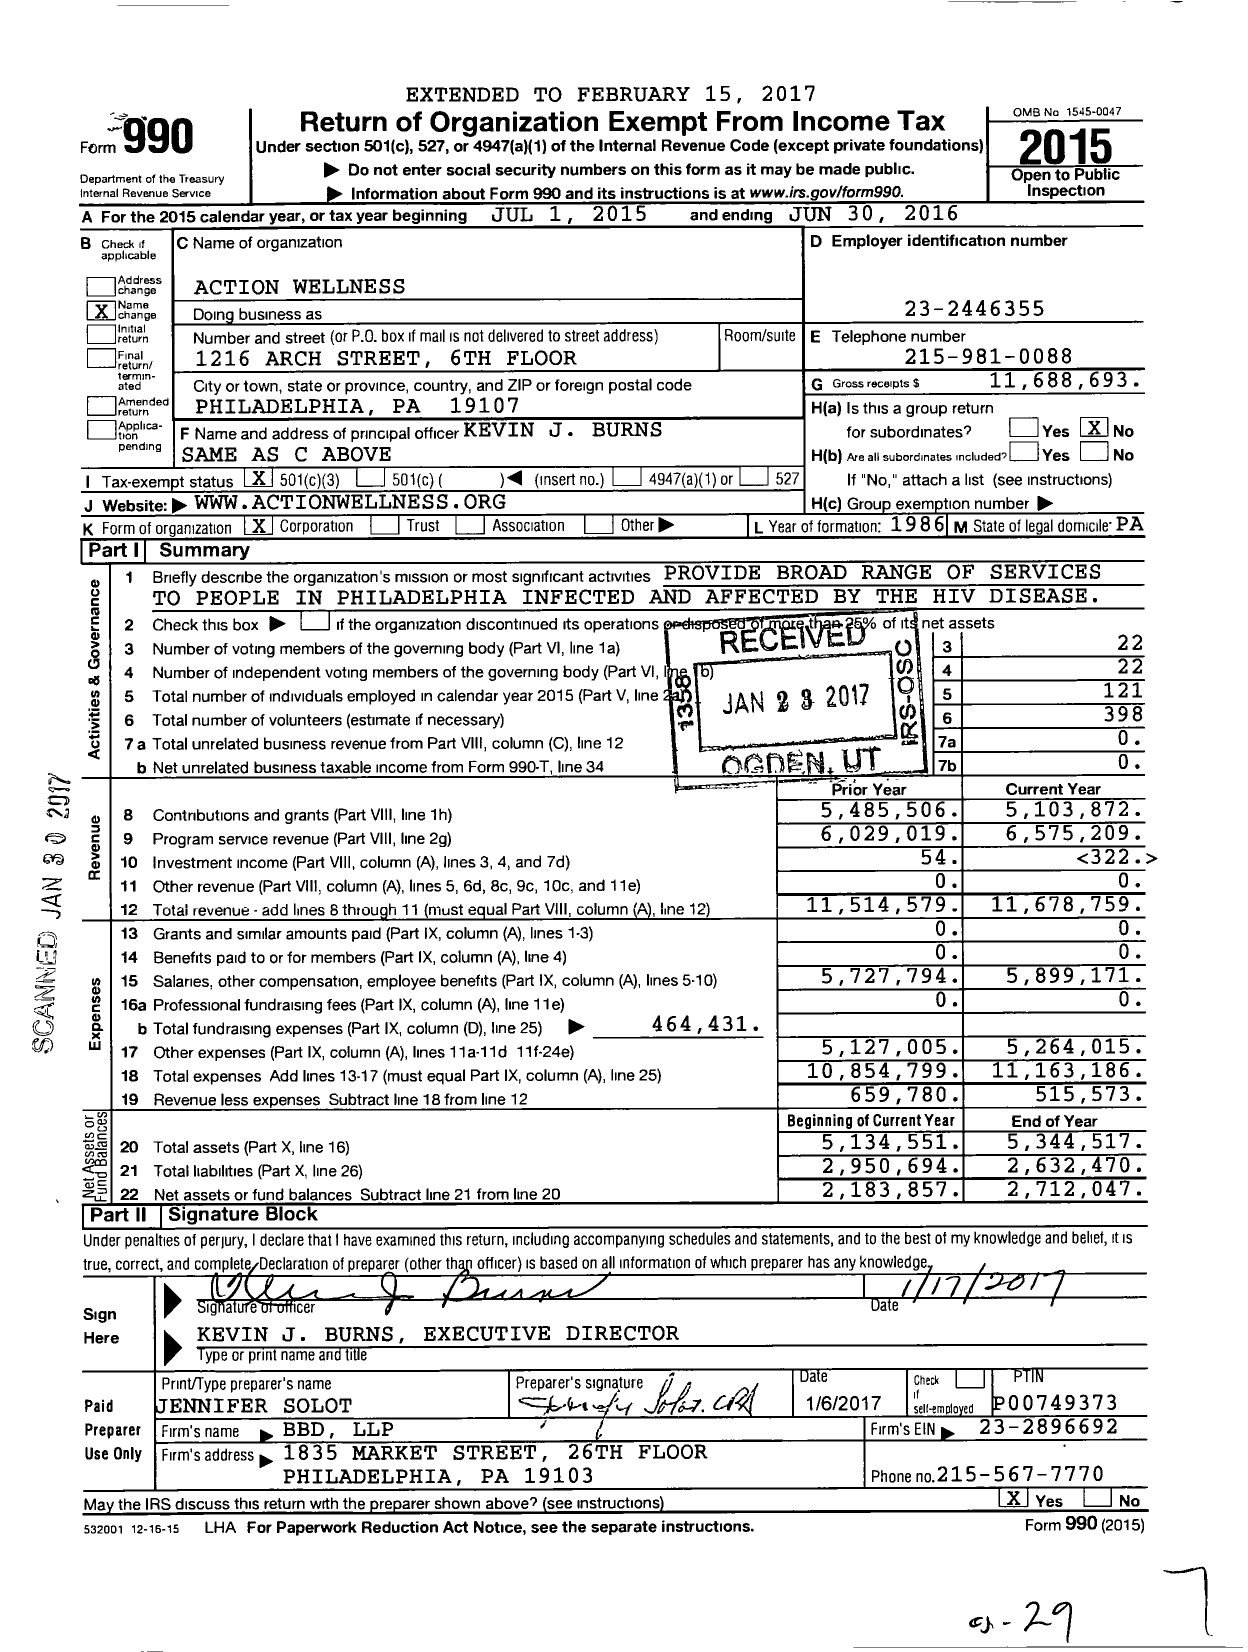 Image of first page of 2015 Form 990 for Action Wellness